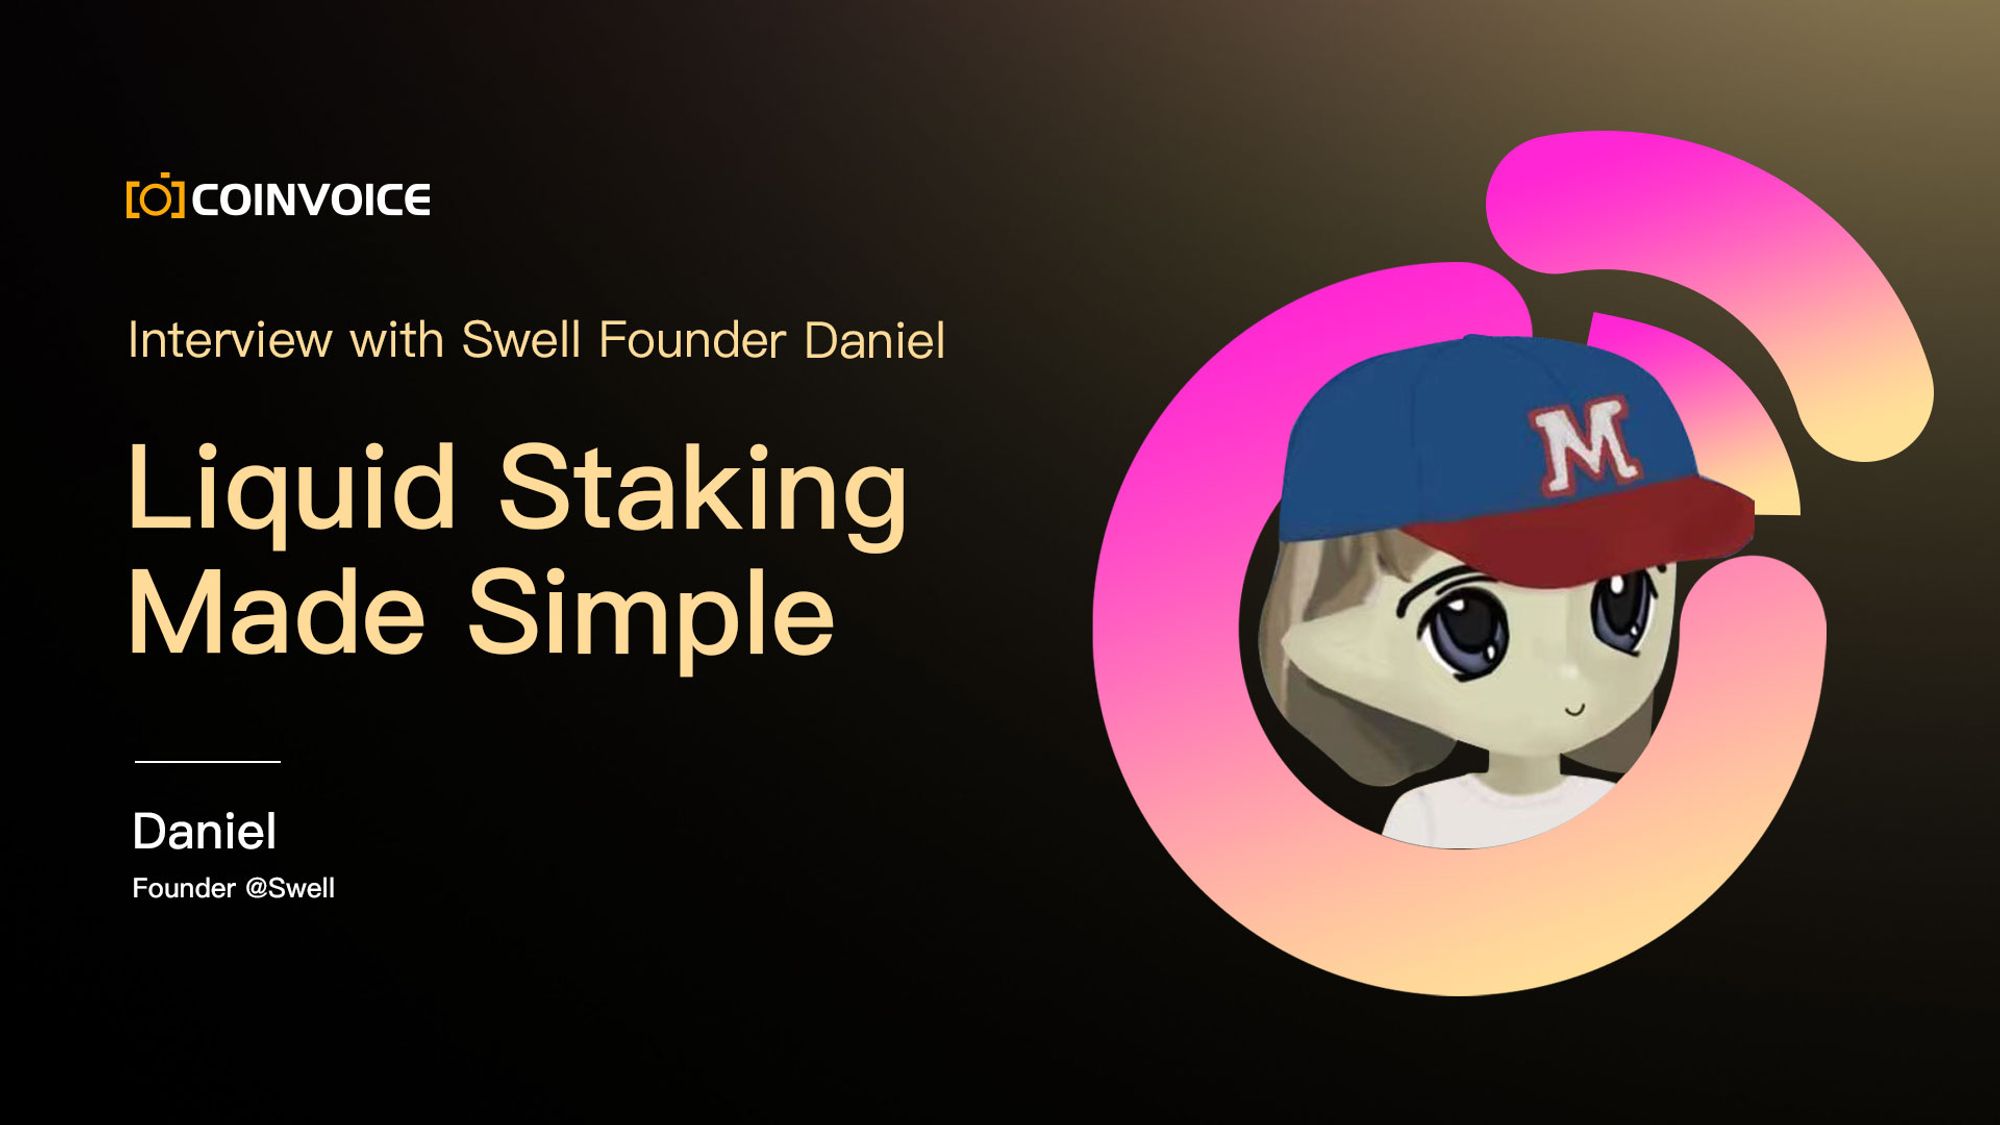 Interview with Swell Founder Daniel ：Liquid Staking Made Simple